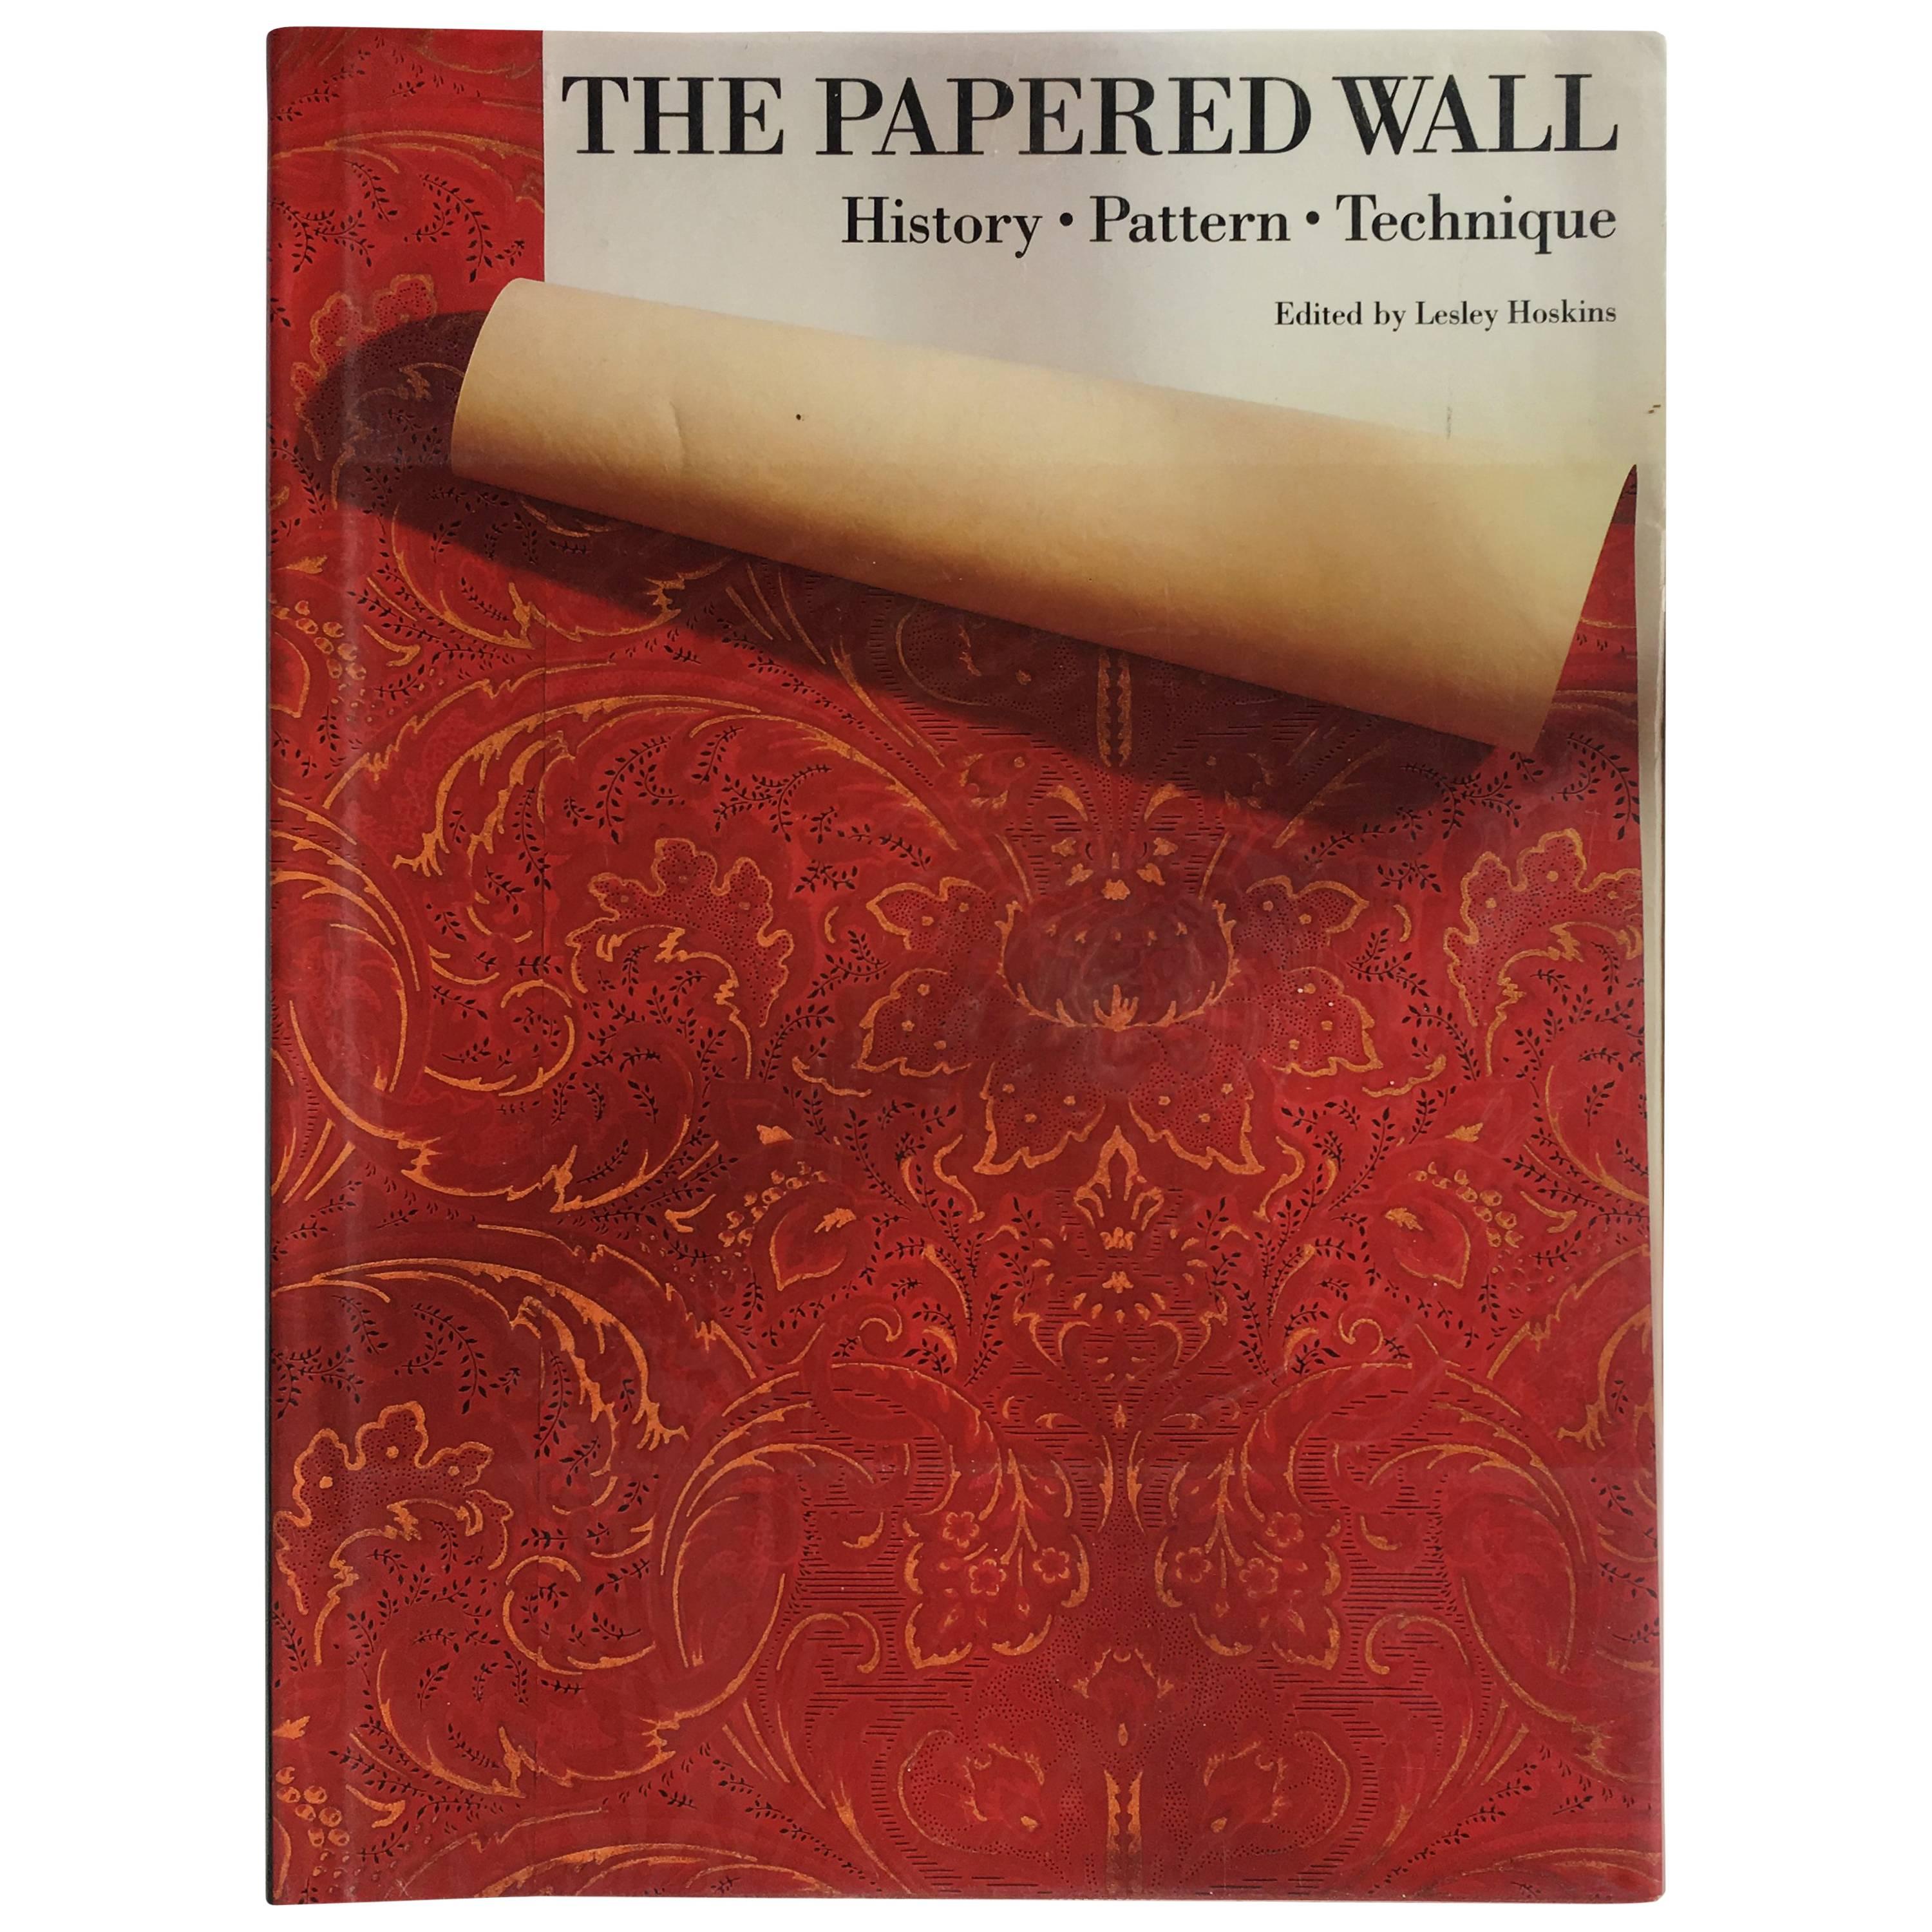 The Papered Wall History, Pattern and Technique